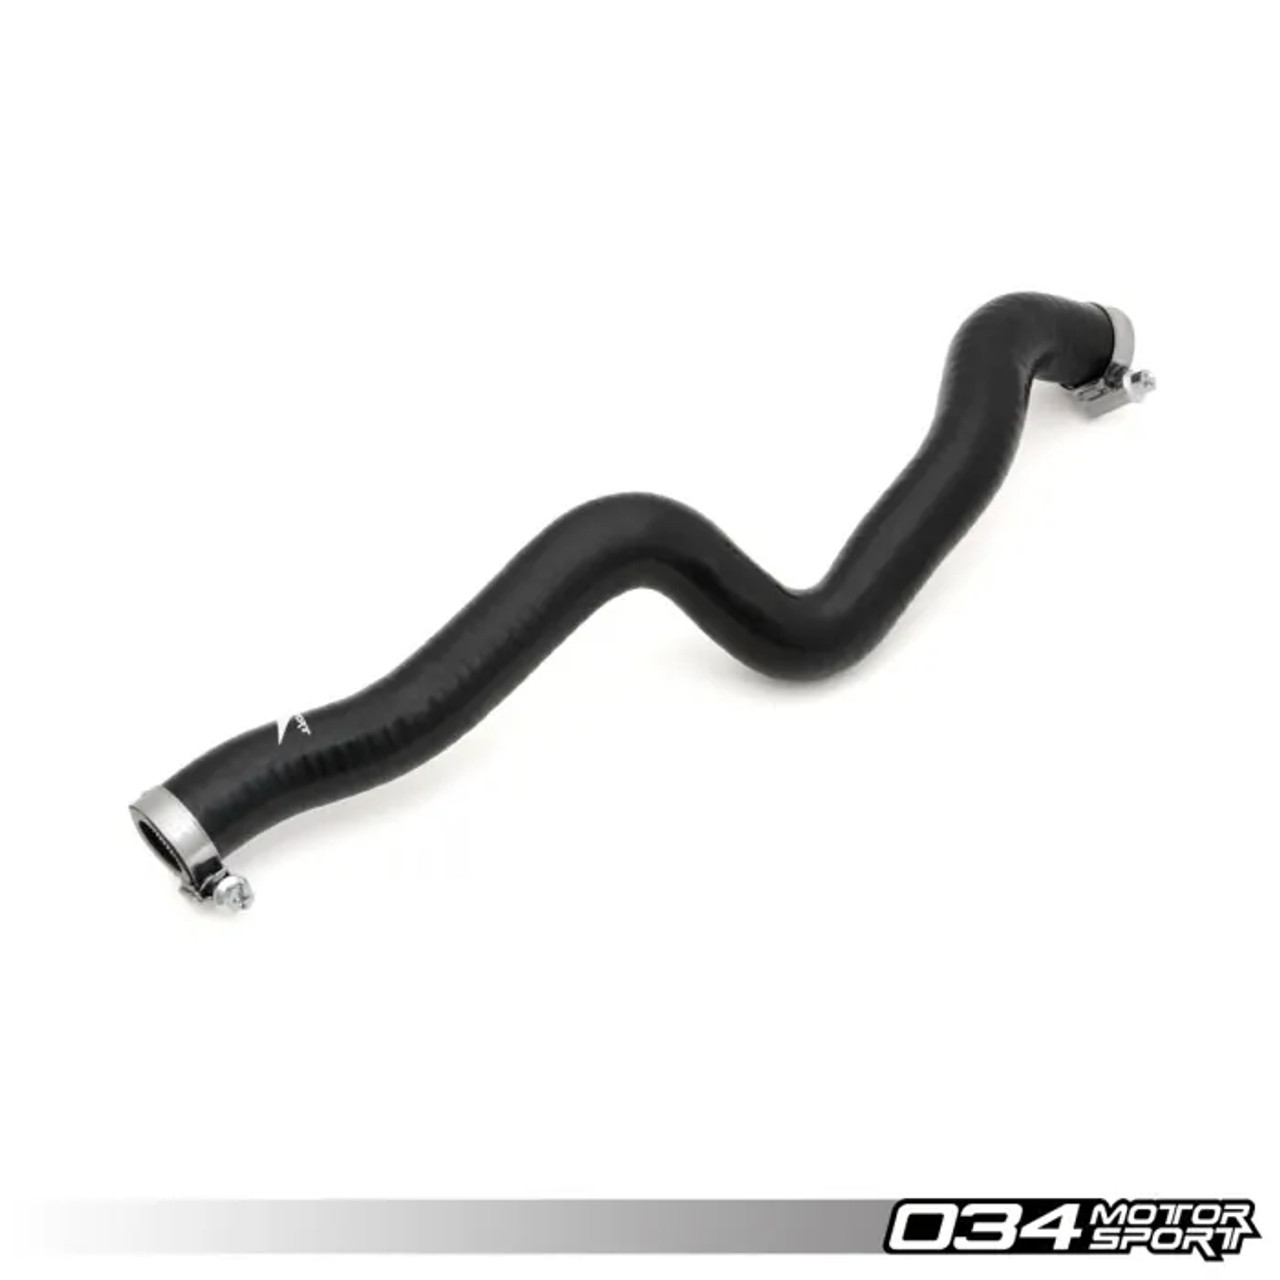 034Motorsport After Run Auxiliary Coolant Pump Delete Silicone Hose for B5 S4 & C5 A6 2.7T